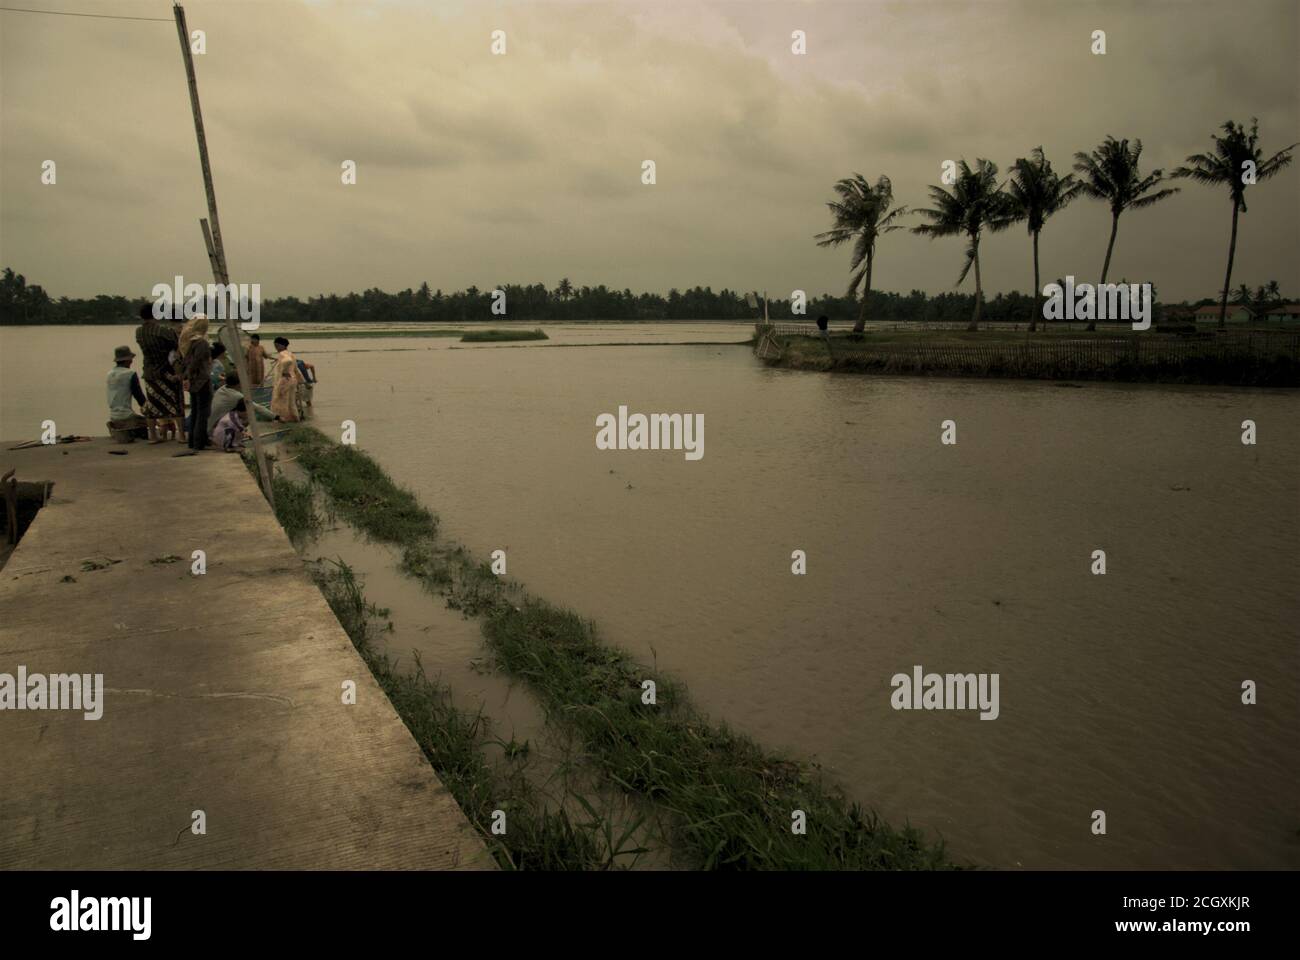 Farmers grouping on a concreted walking path to fish, as torrential rains during rainy season have left some agricultural areas flooded in Karawang regency, West Java province, Indonesia. Stock Photo